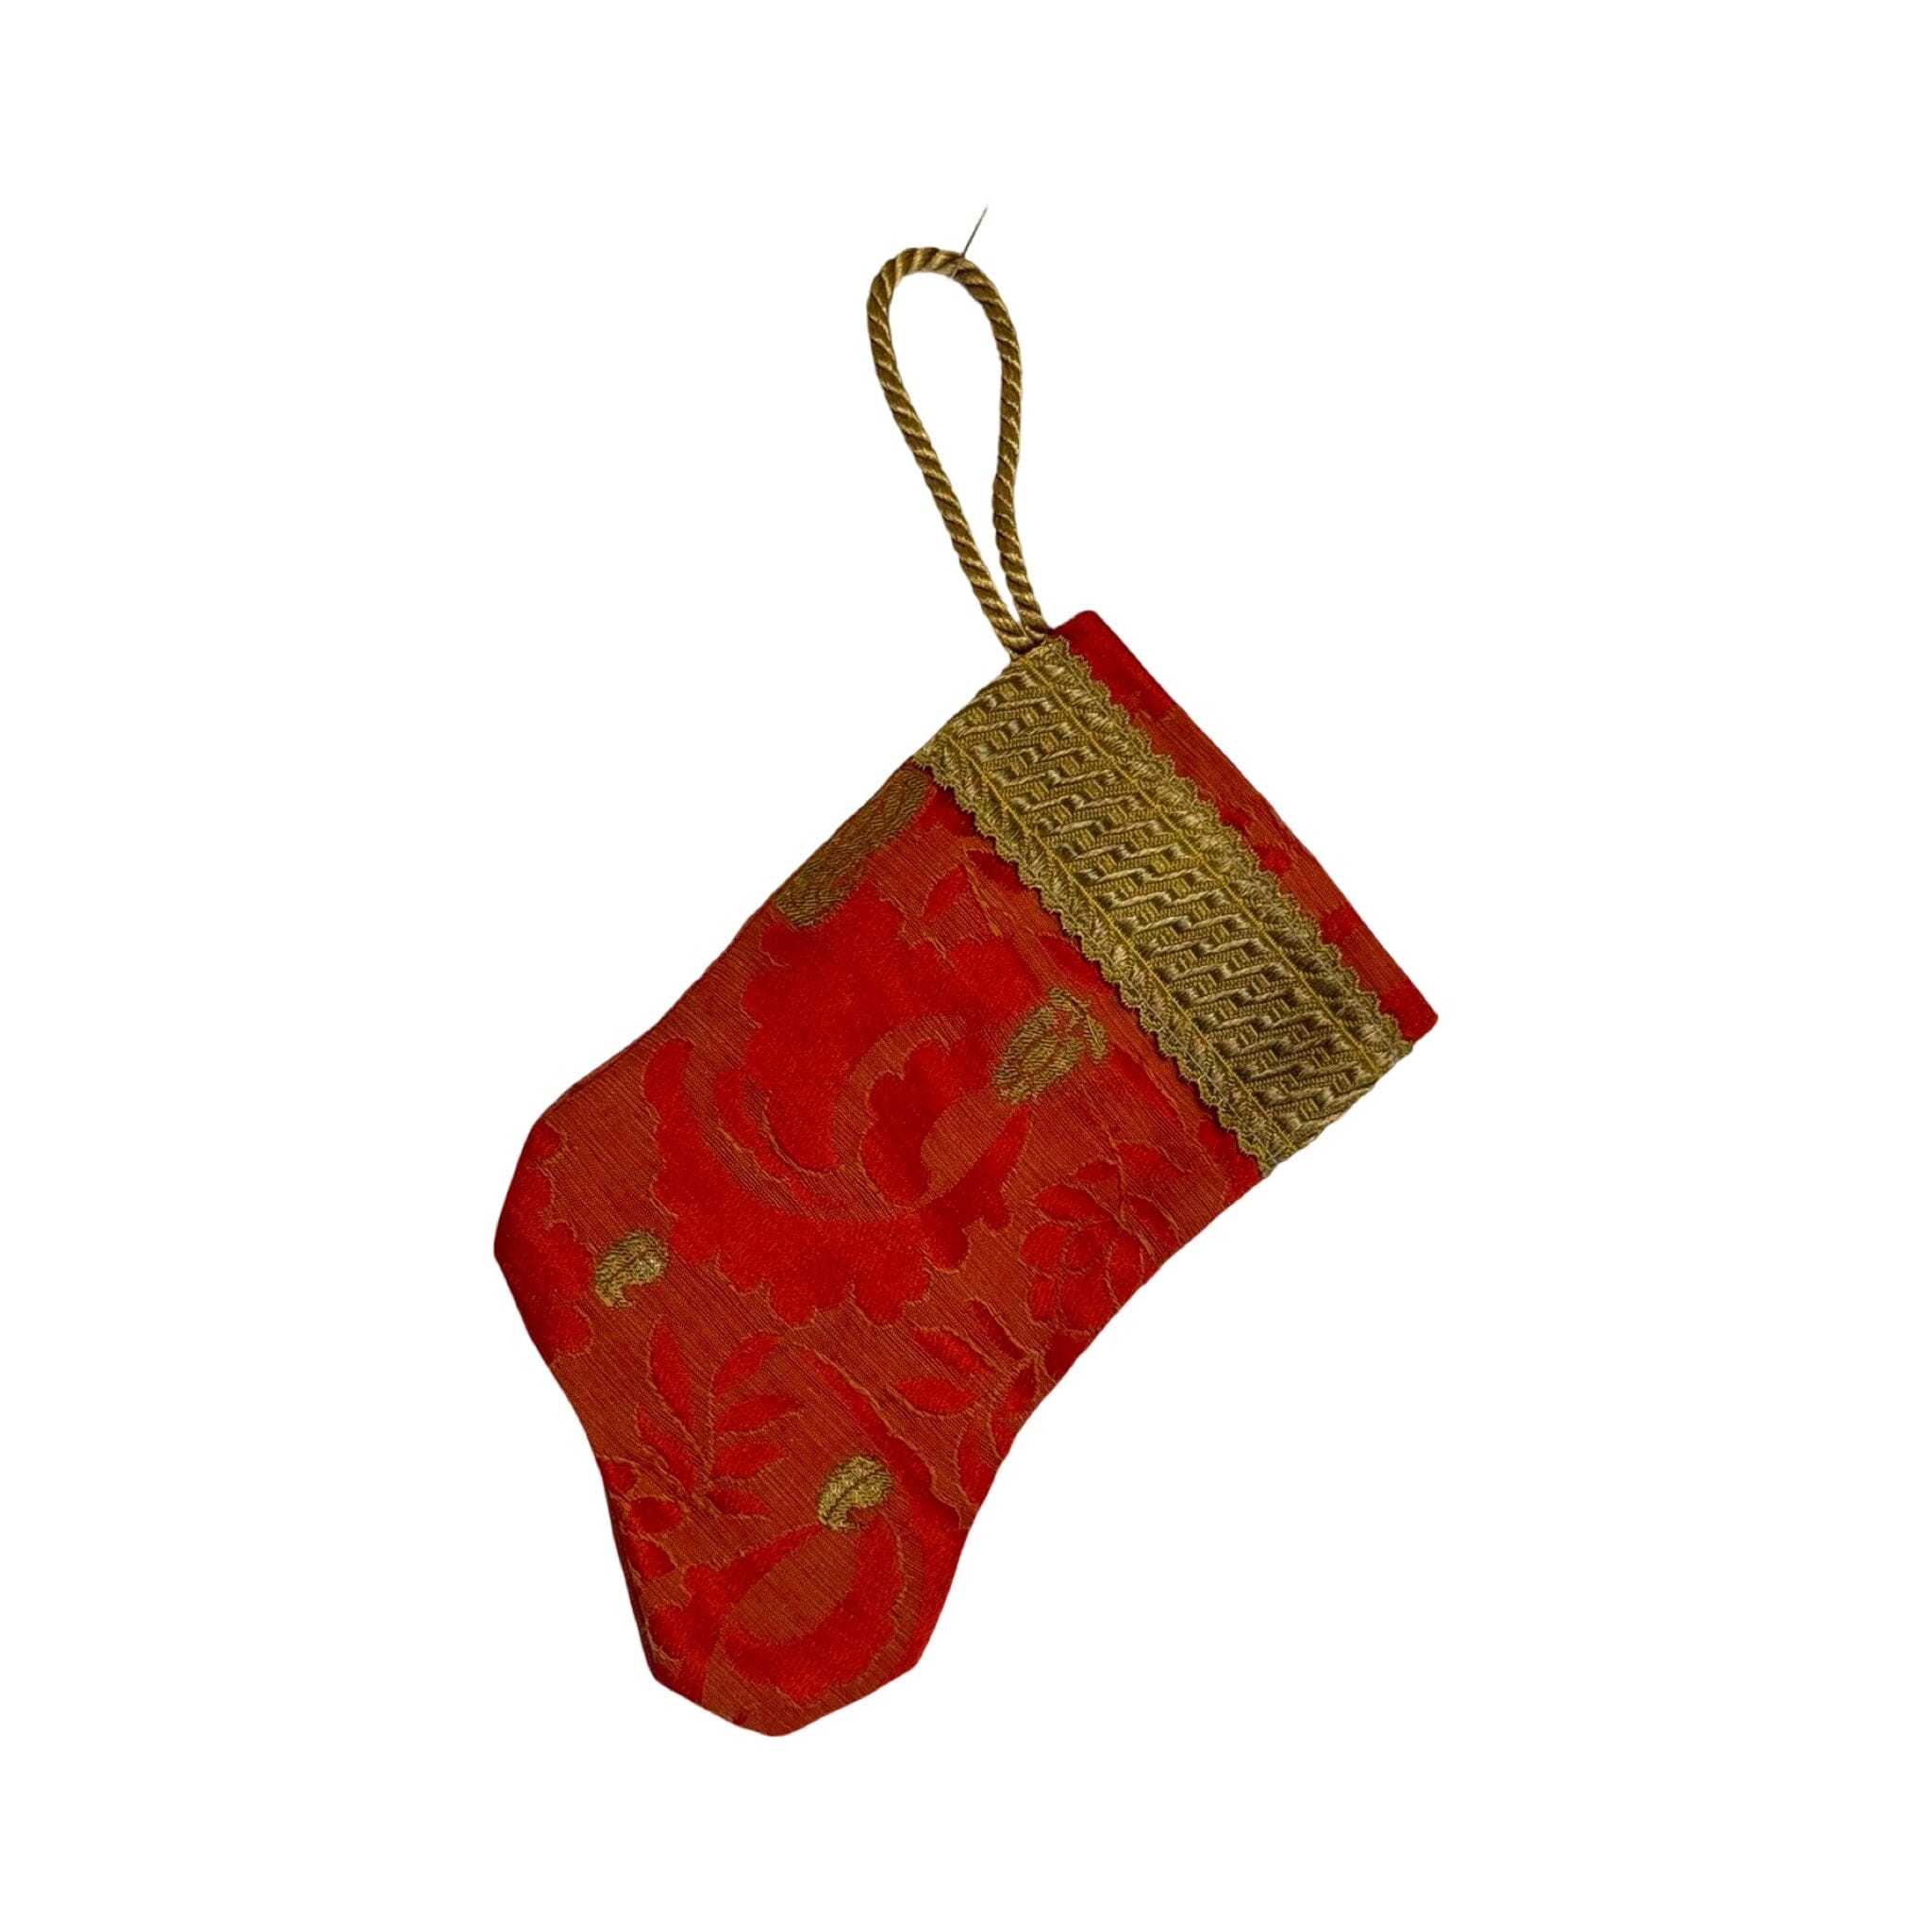 Handmade Mini Stocking Made From Vintage Fabric and Trims- Red and Gold Ornament B. Viz Design C 